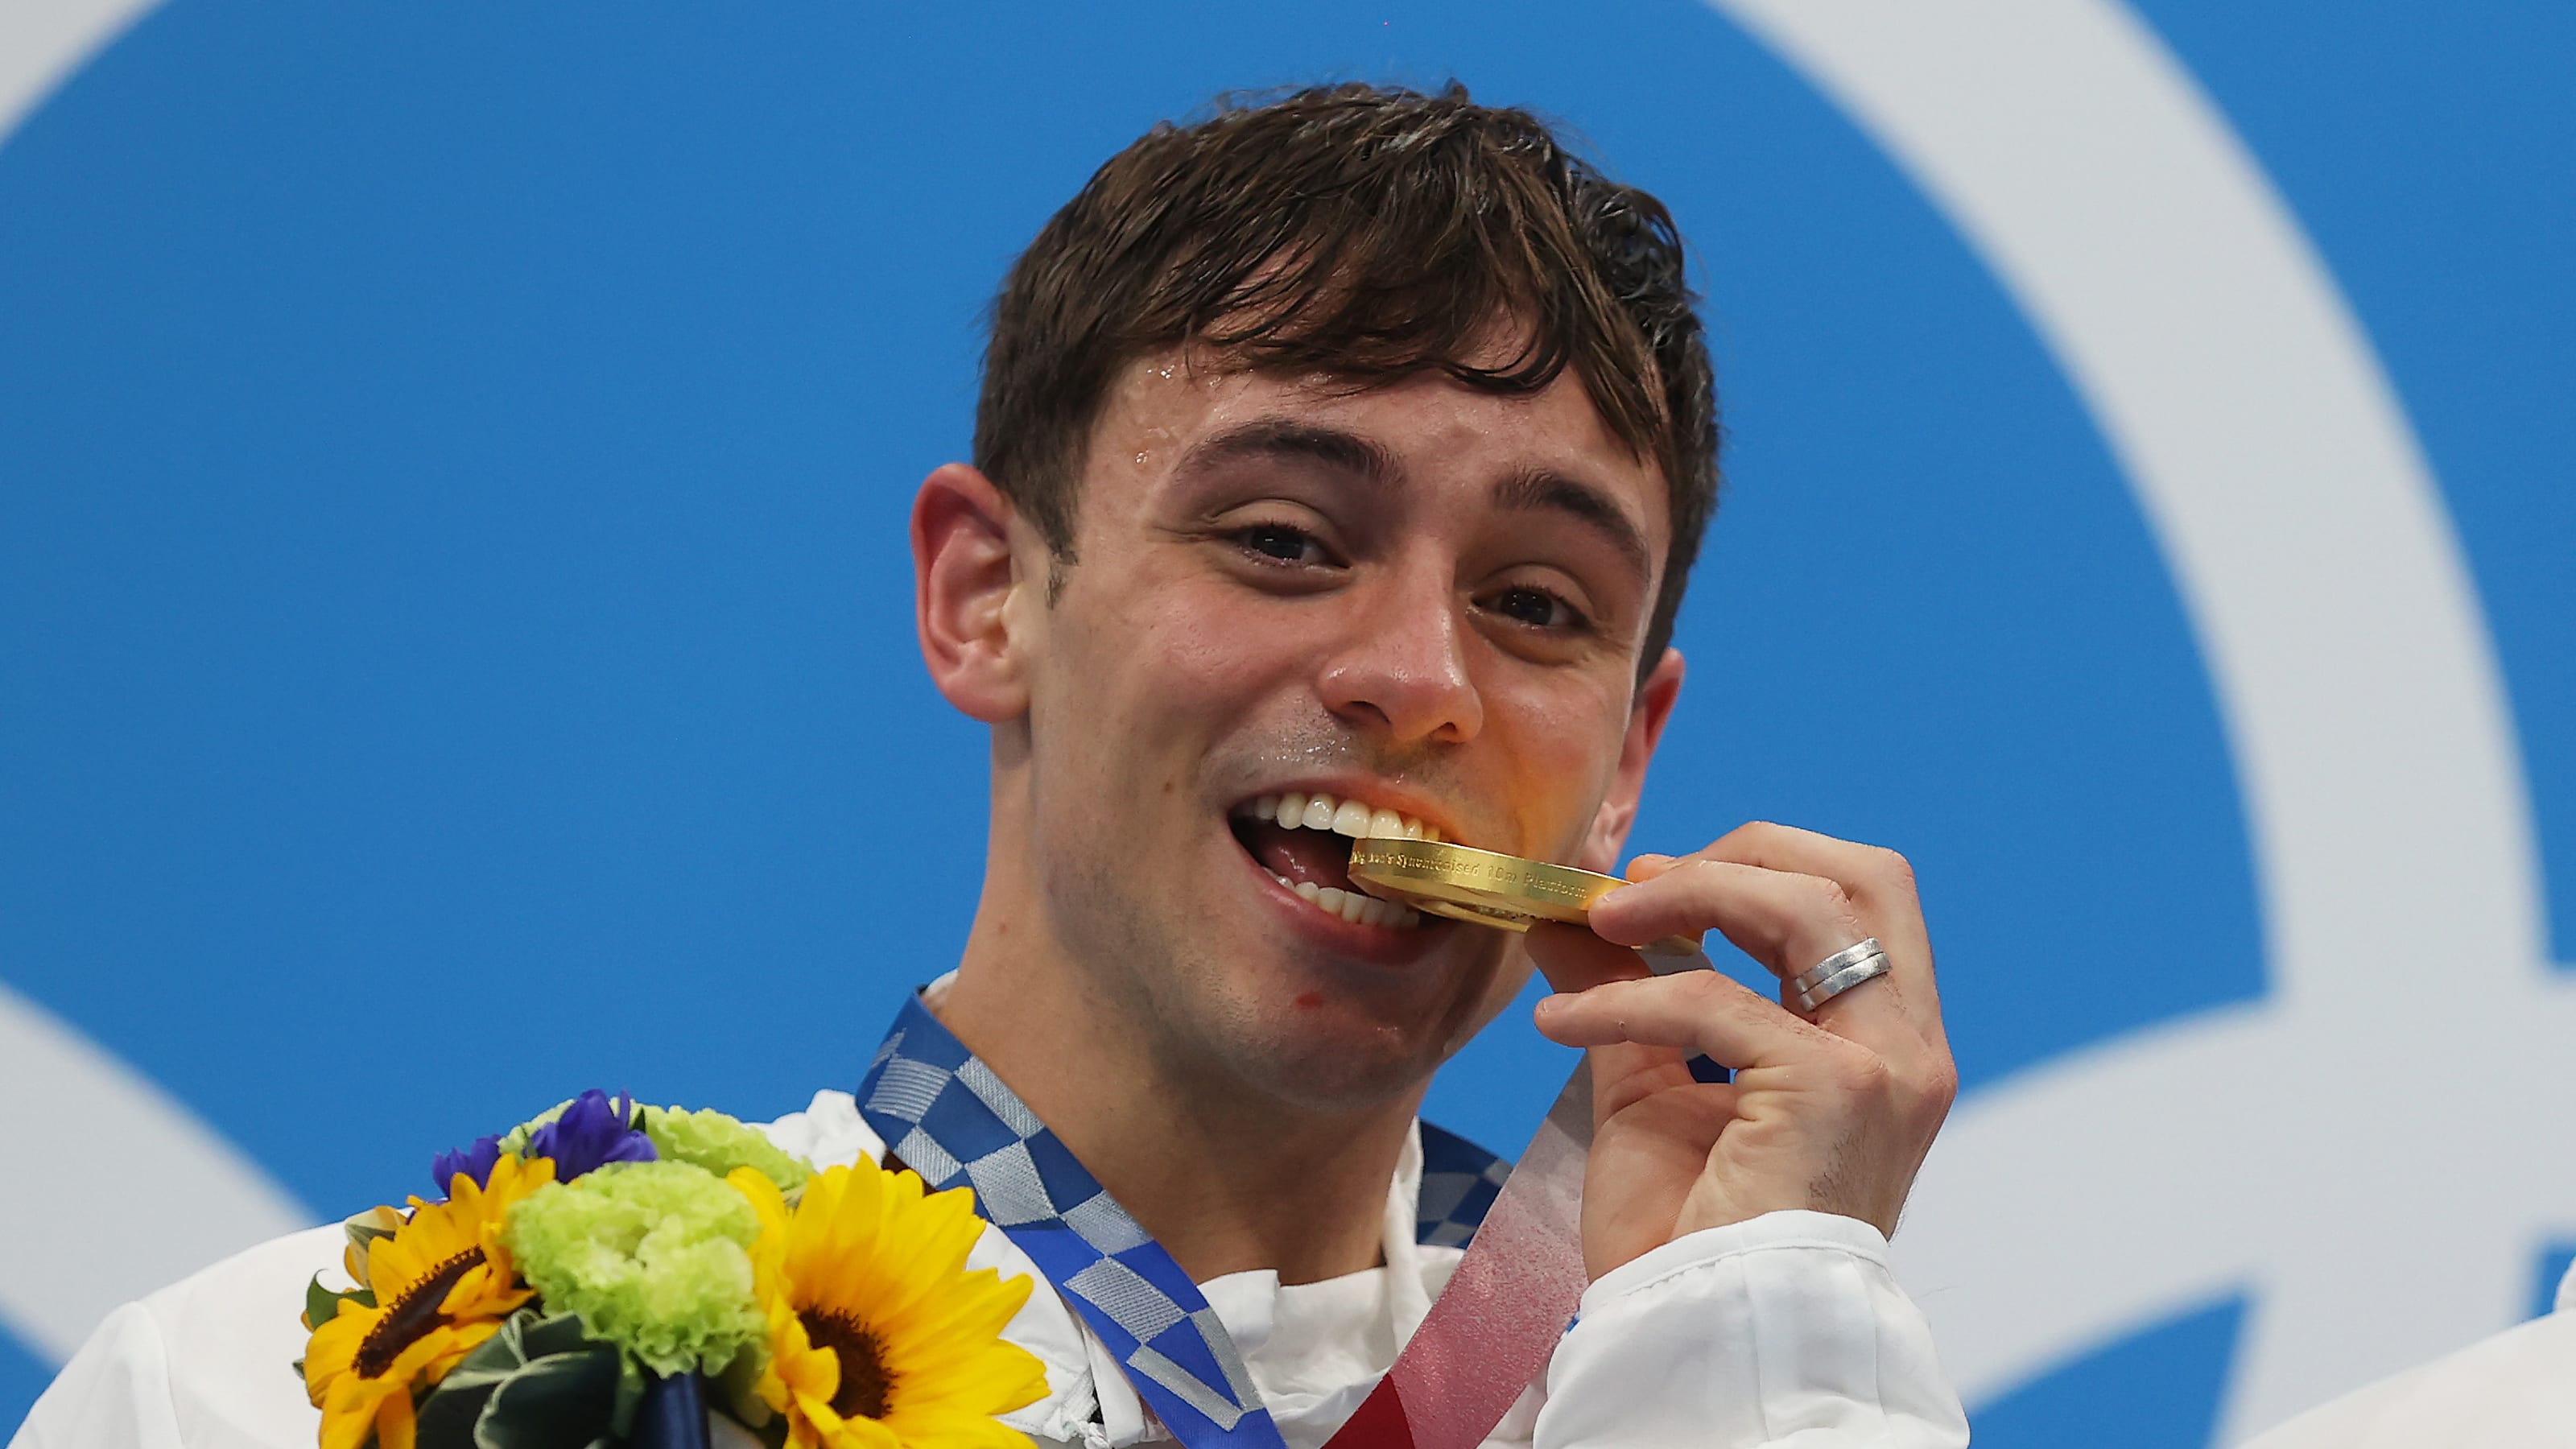 Tom Daley: His story at the Tokyo 2020 Olympics